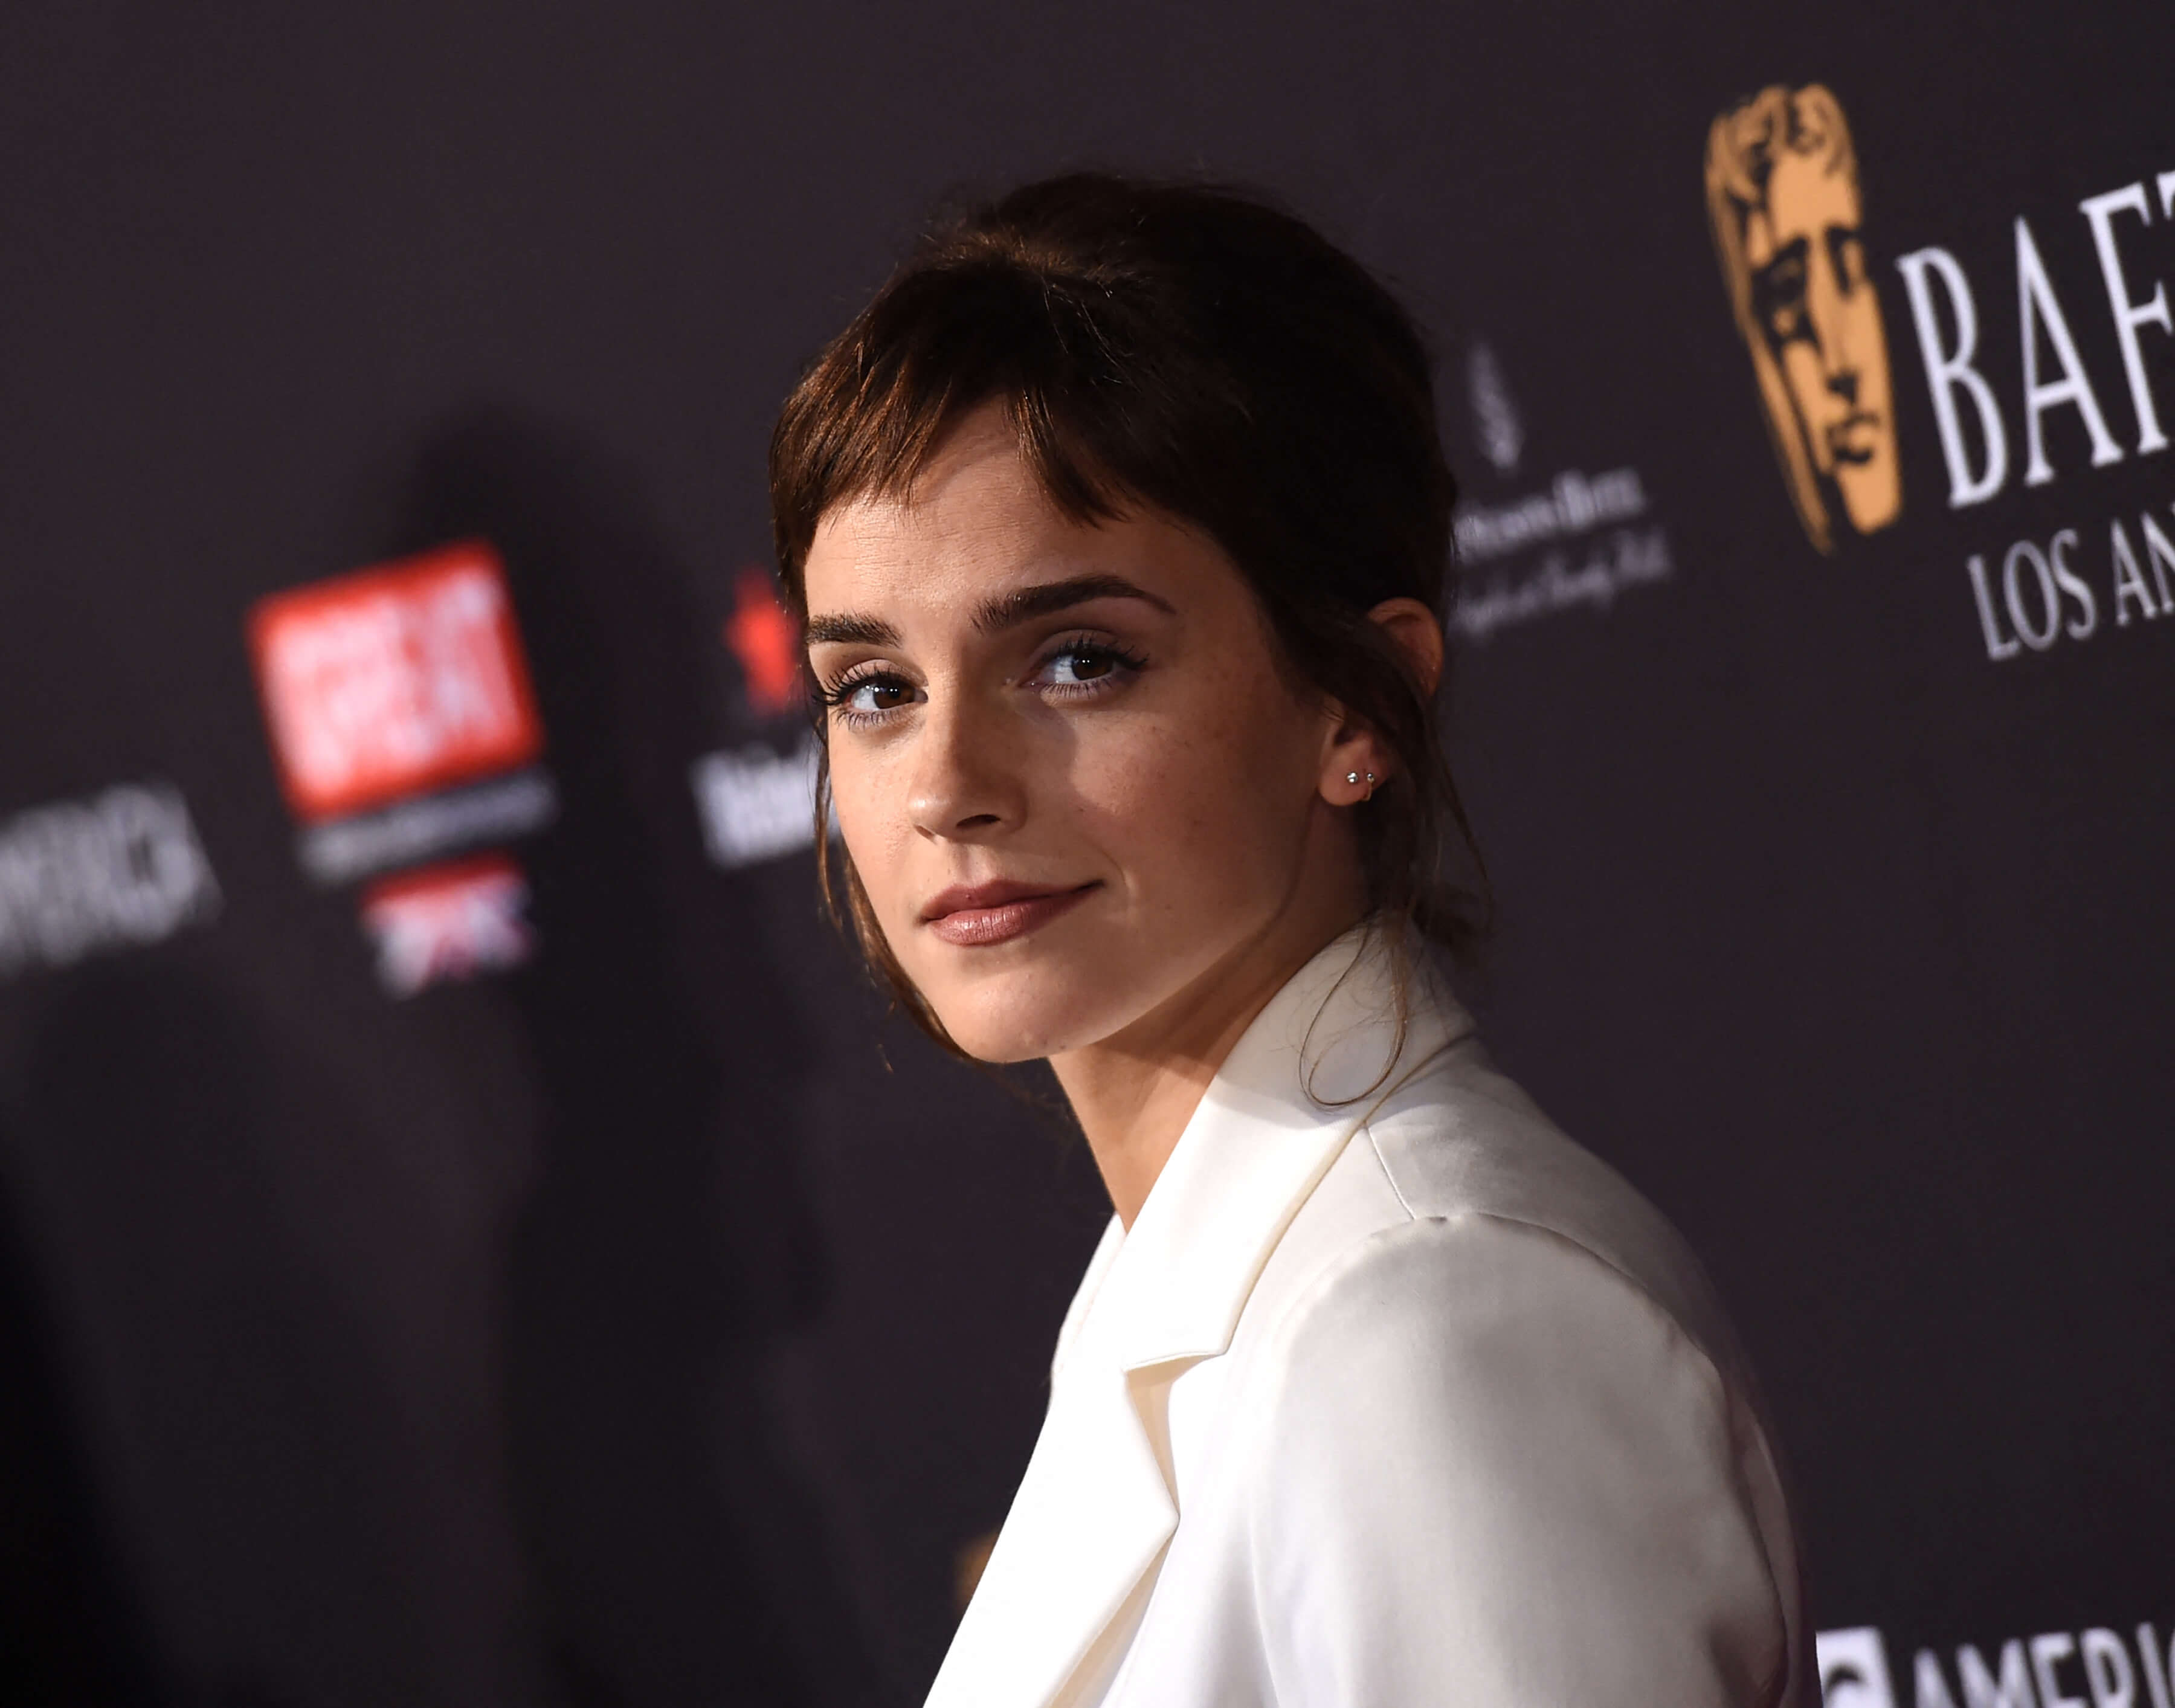 How education influenced Emma Watson's career after Harry Potter